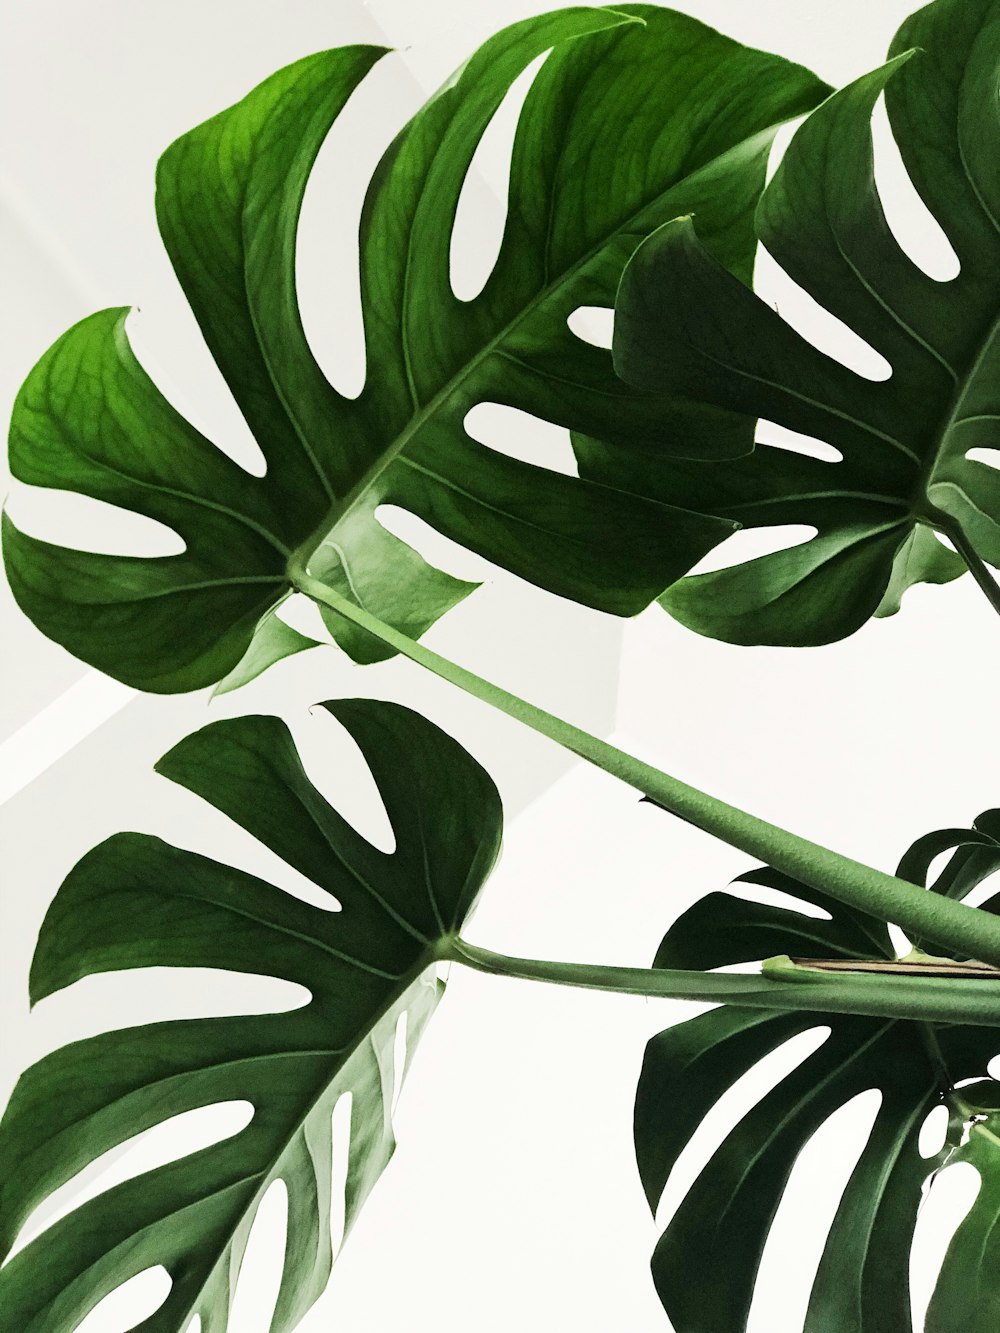 500 Monstera Pictures Download Free Images On Unsplash